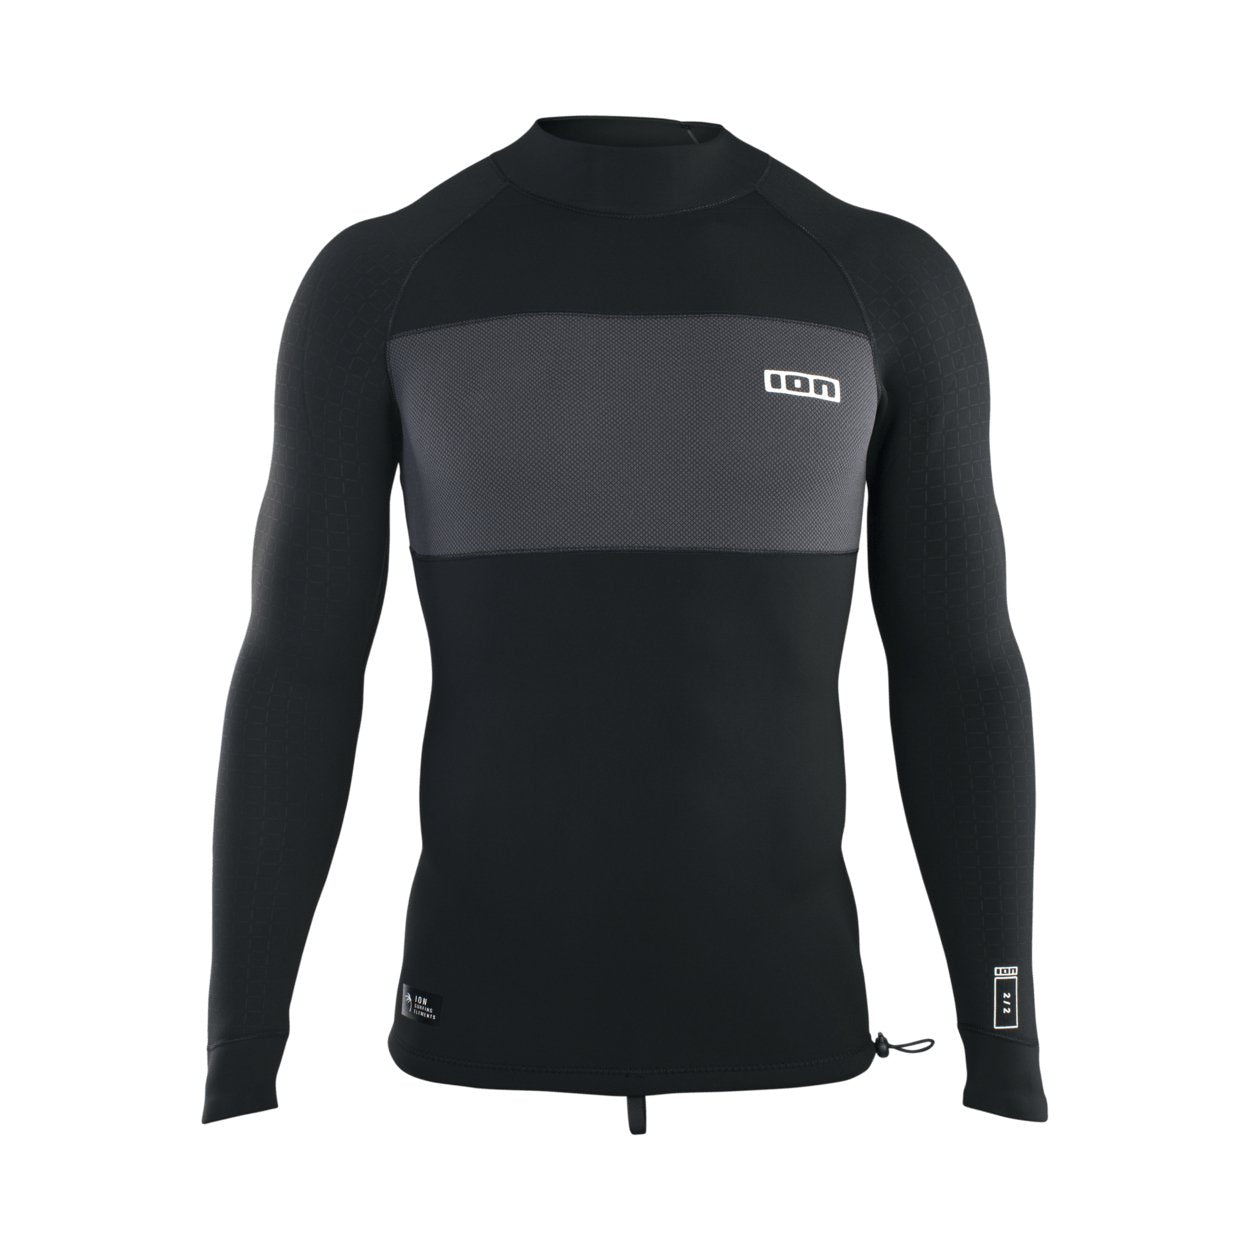 ION Neo Top 2/2 LS men 2023 - Worthing Watersports - 9010583091495 - Tops - ION Water